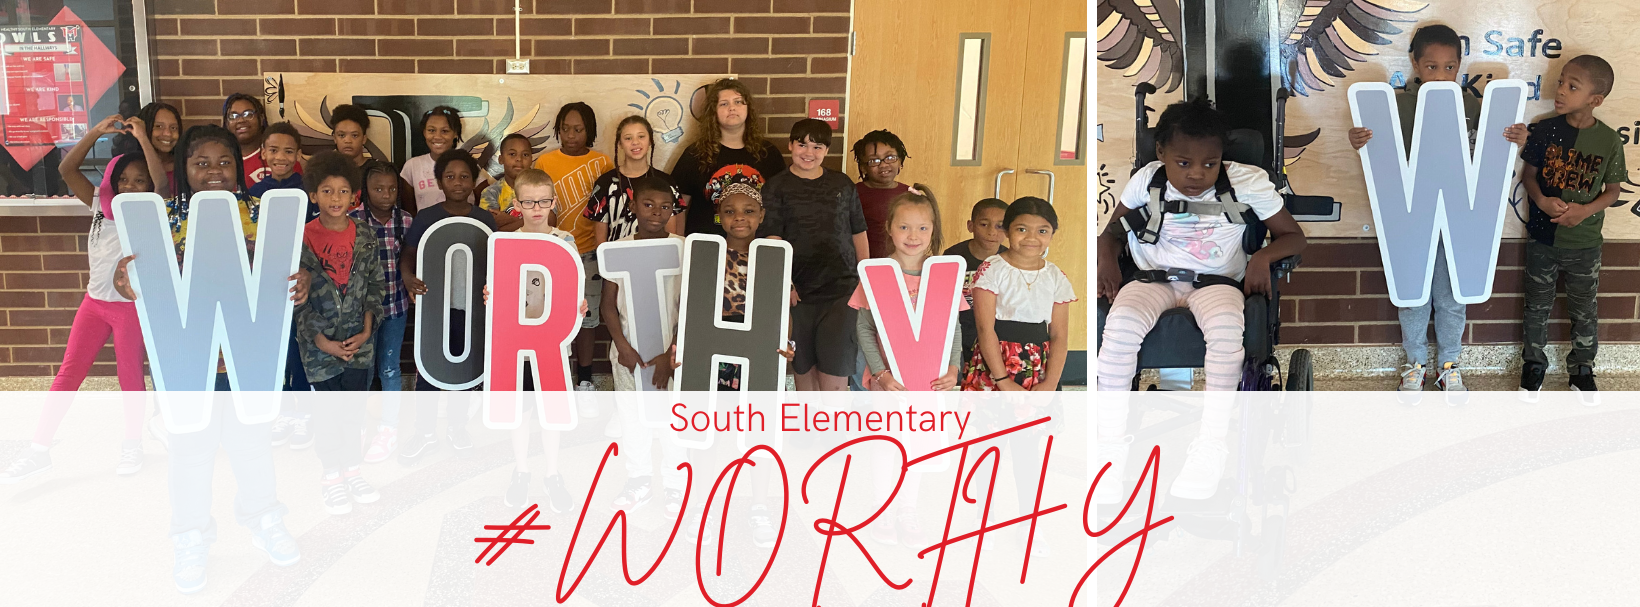 9/16 South Elementary